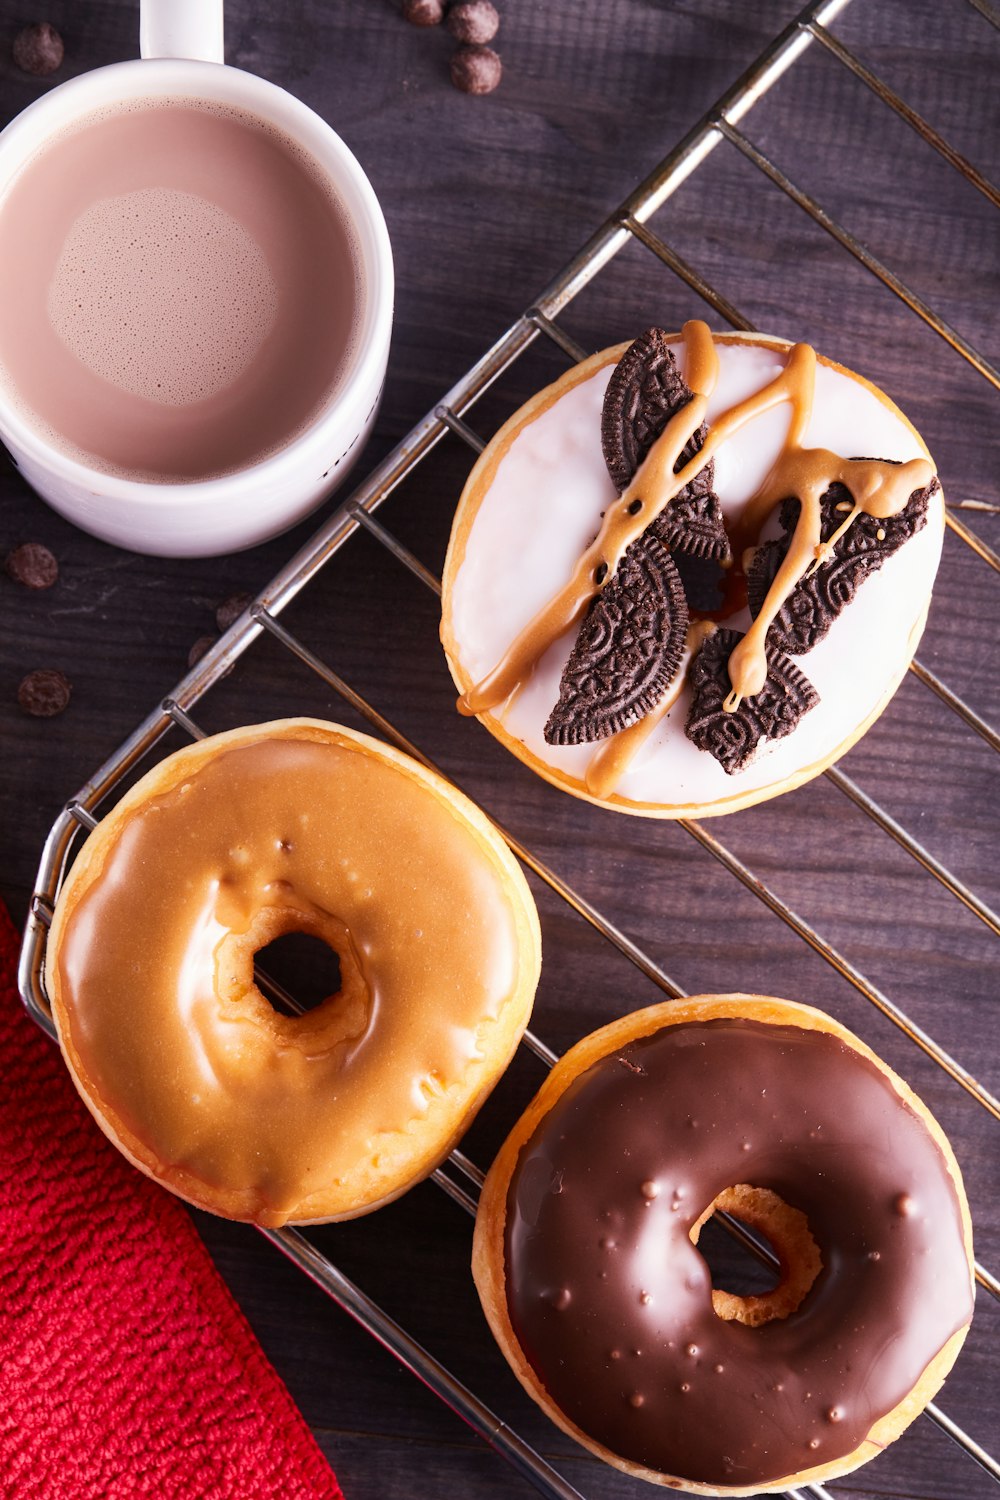 three brown donuts on white ceramic plate